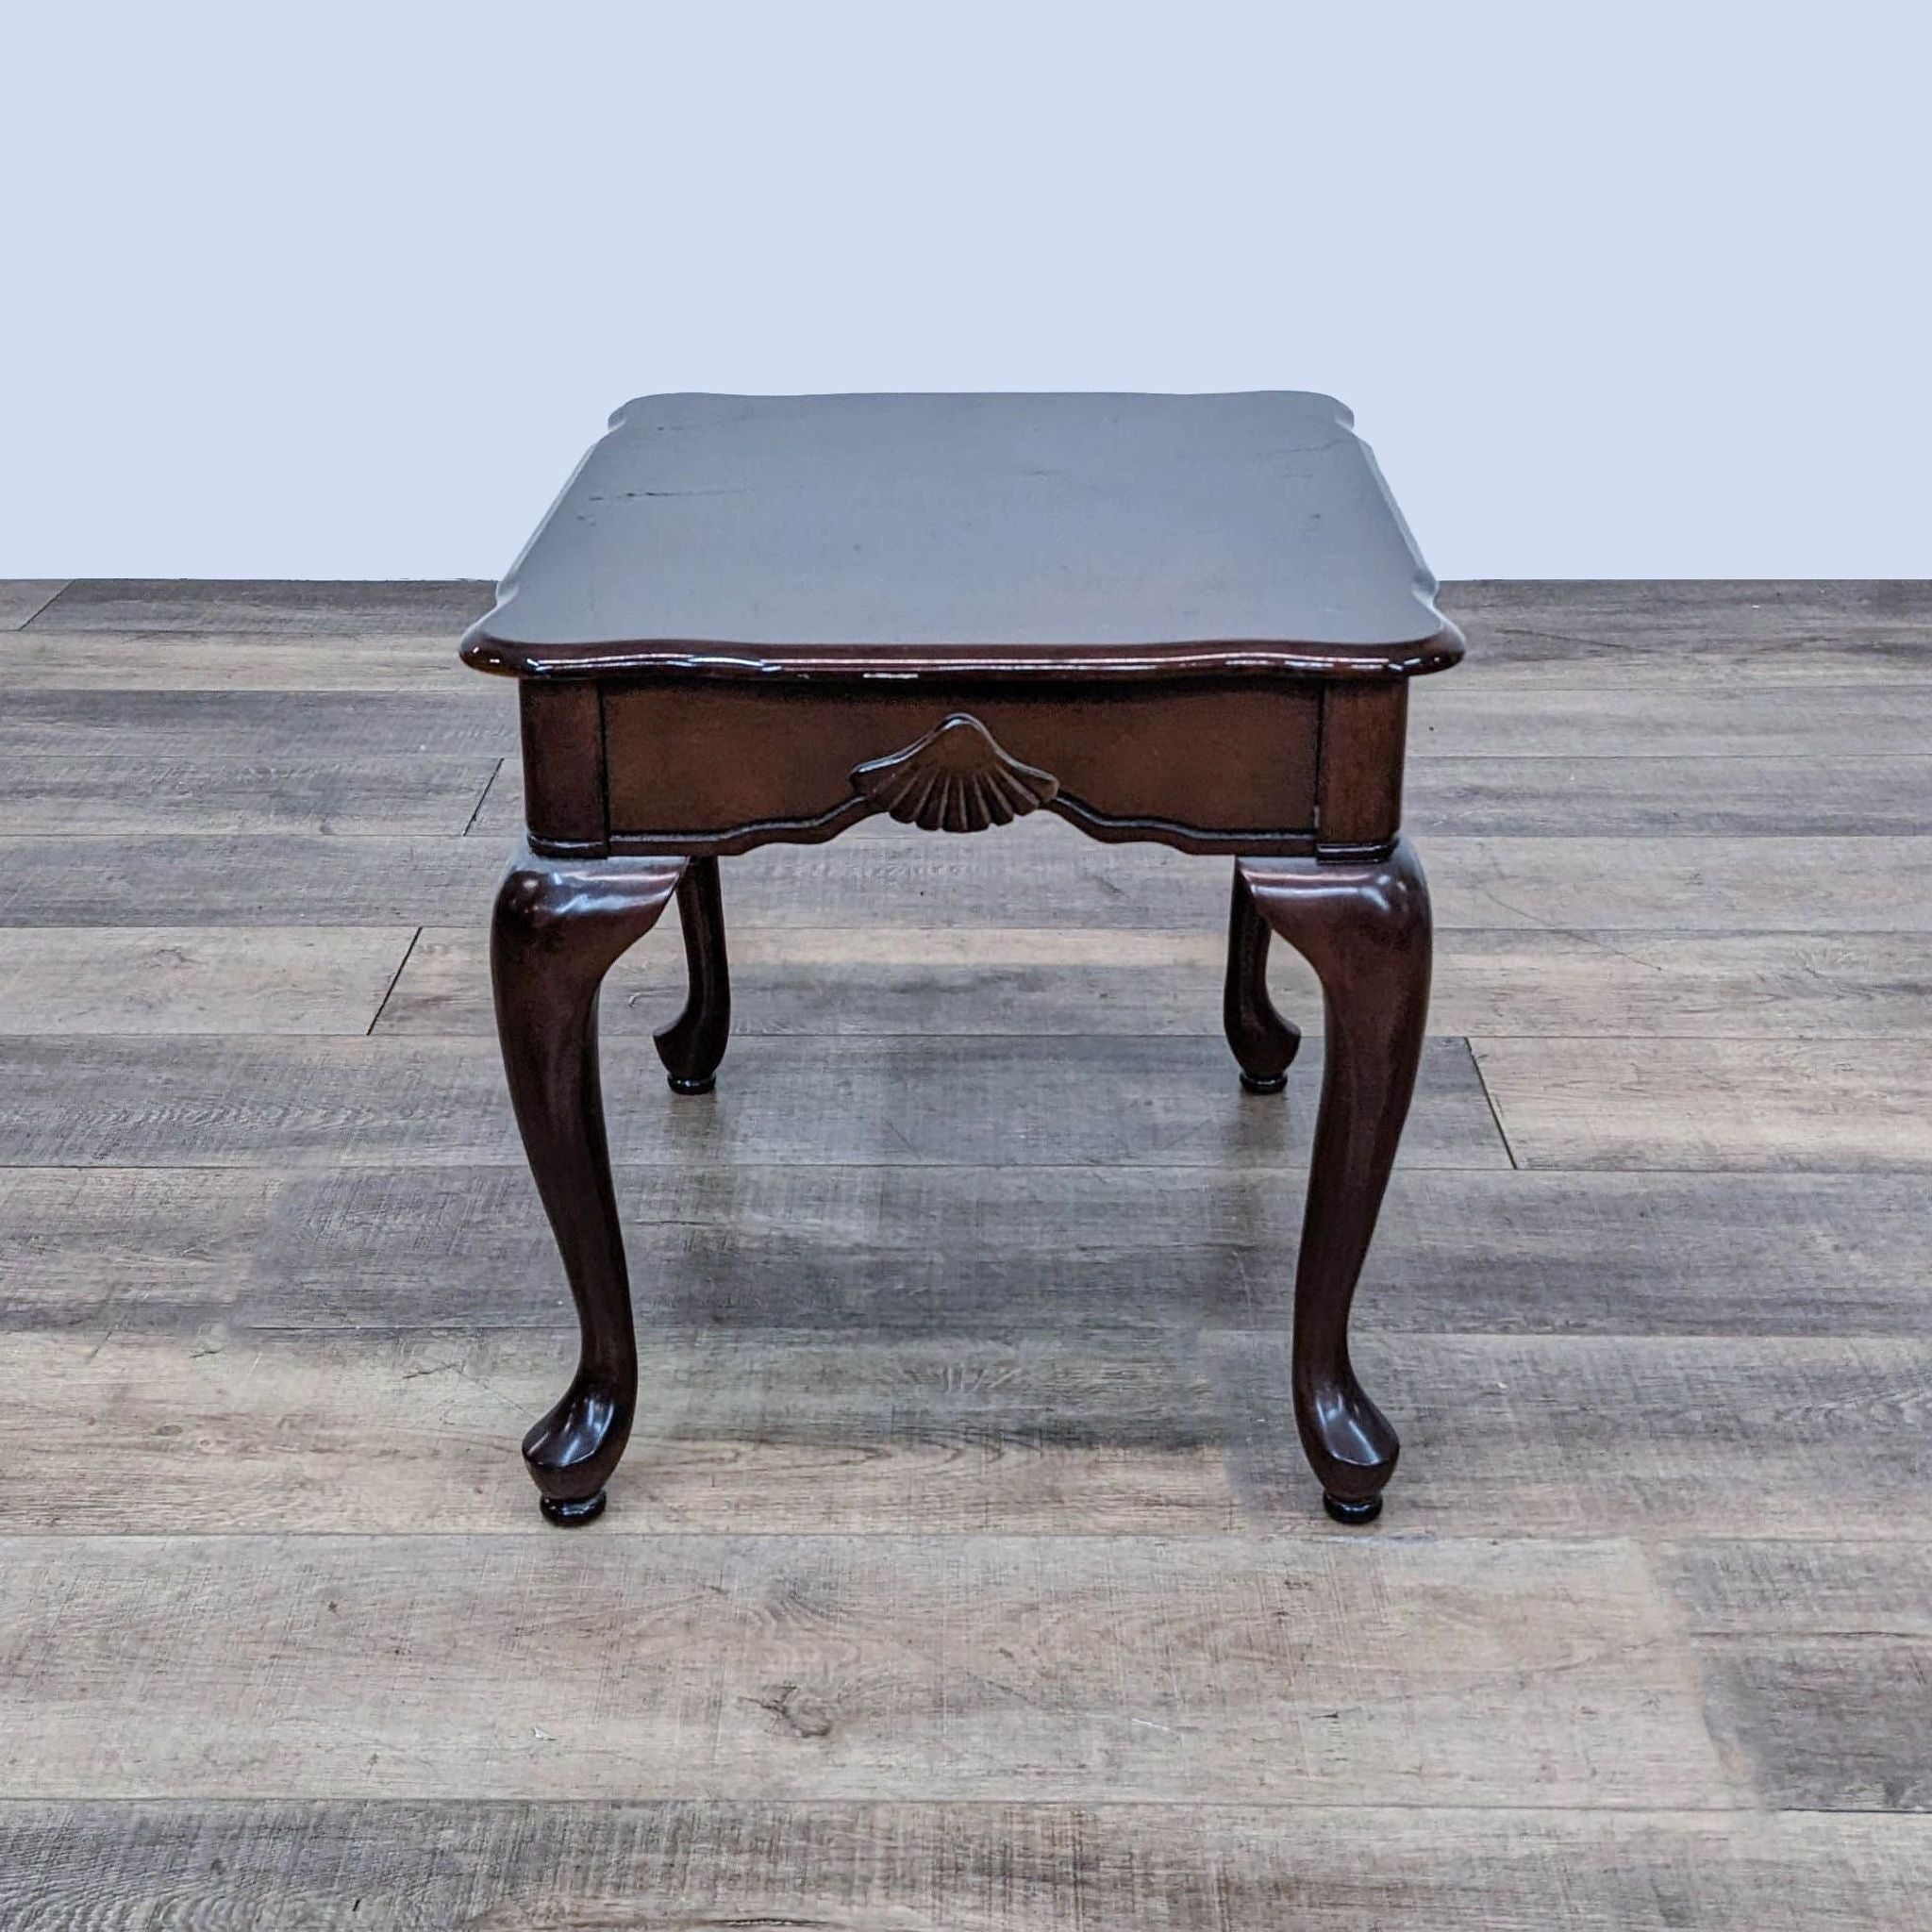 End table by Reperch featuring carved scallop shell embellishment and elegant curved legs.